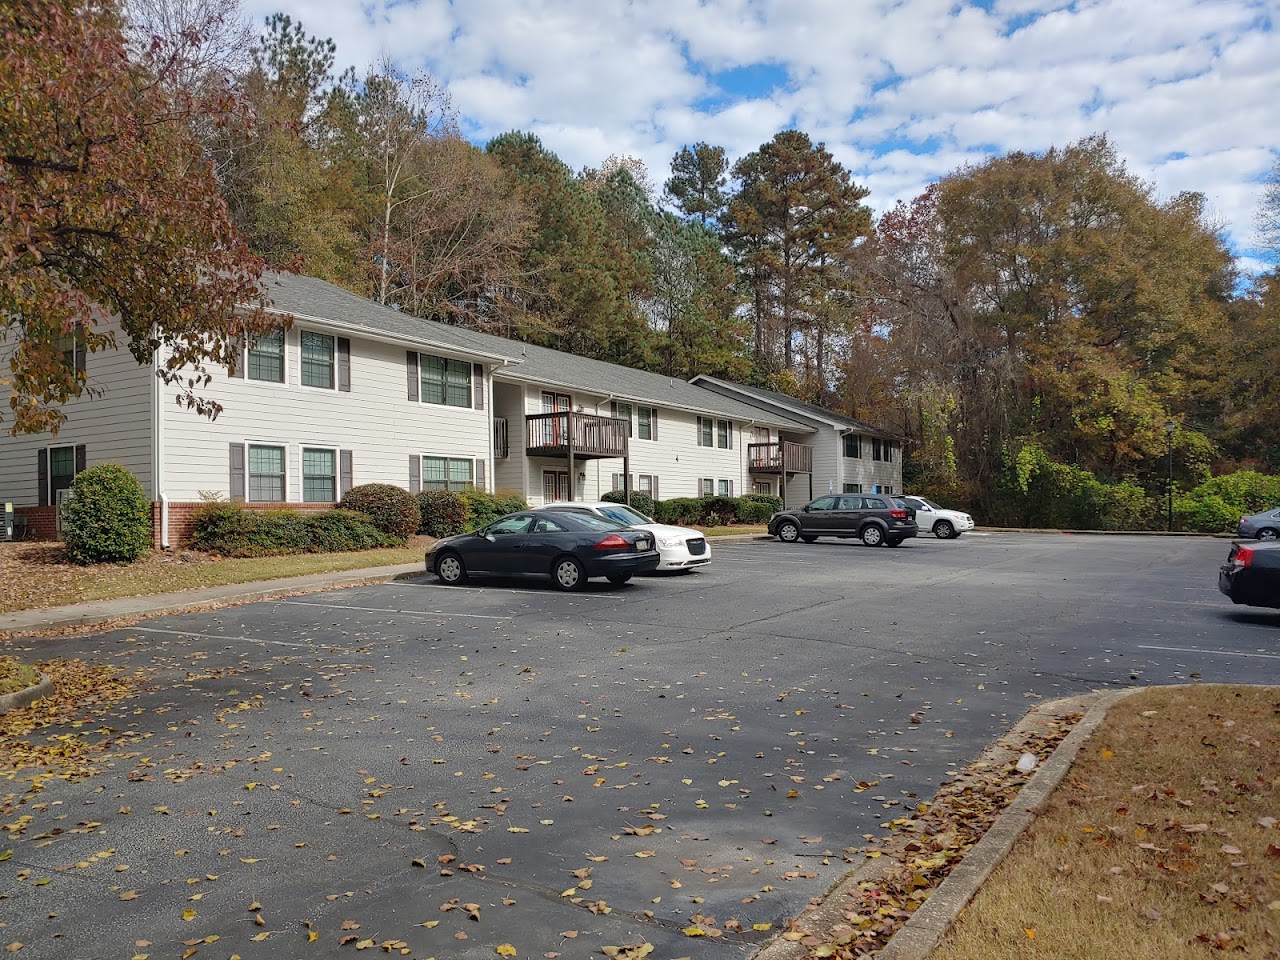 Photo of CAMPBELL CREEK. Affordable housing located at 351 W MEMORIAL DR DALLAS, GA 30132